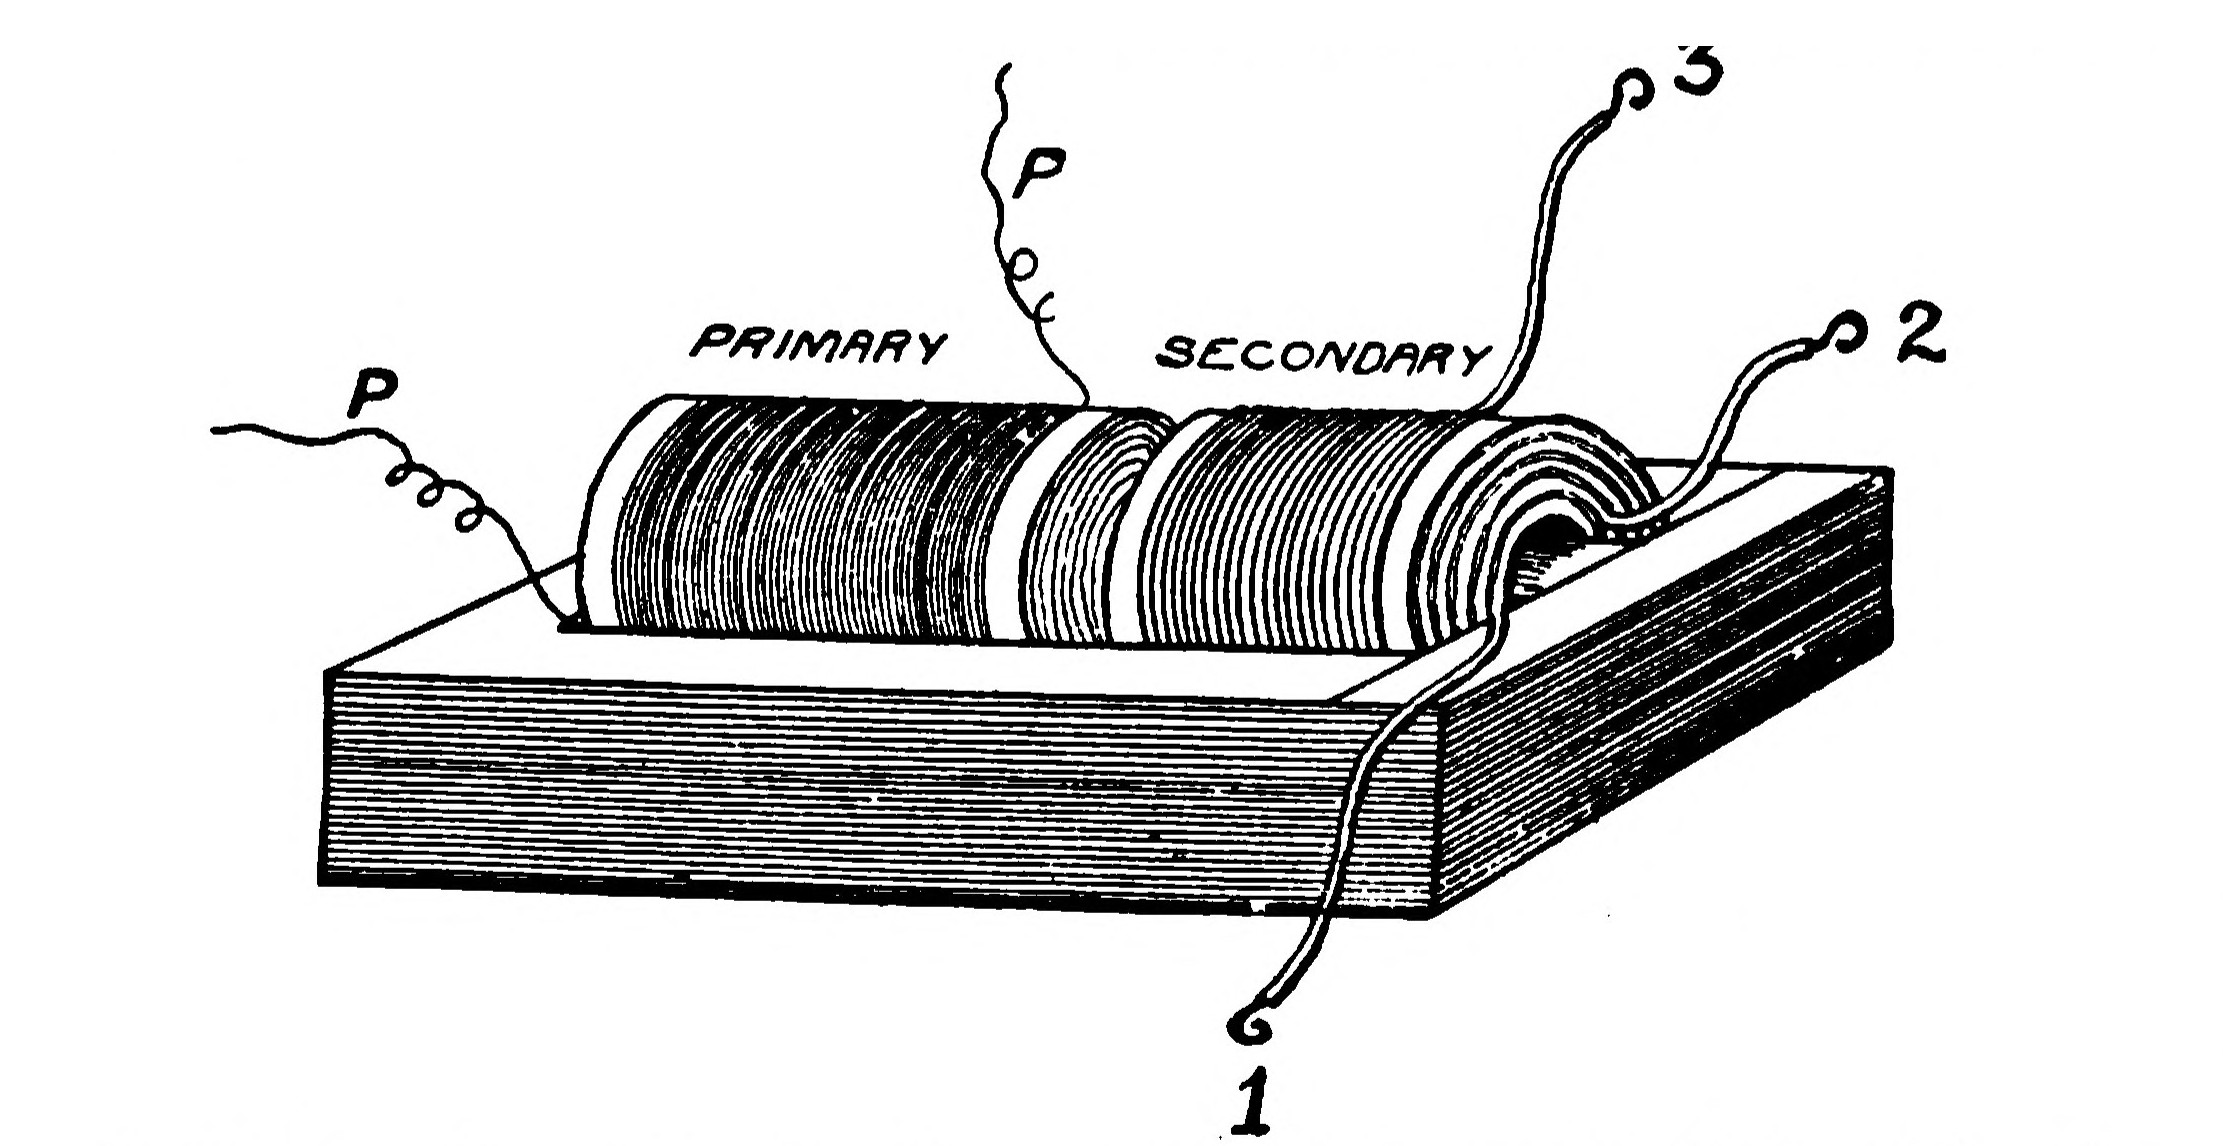 FIG. 62.—Showing the Core completely assembled with the Primary and Secondary in position.